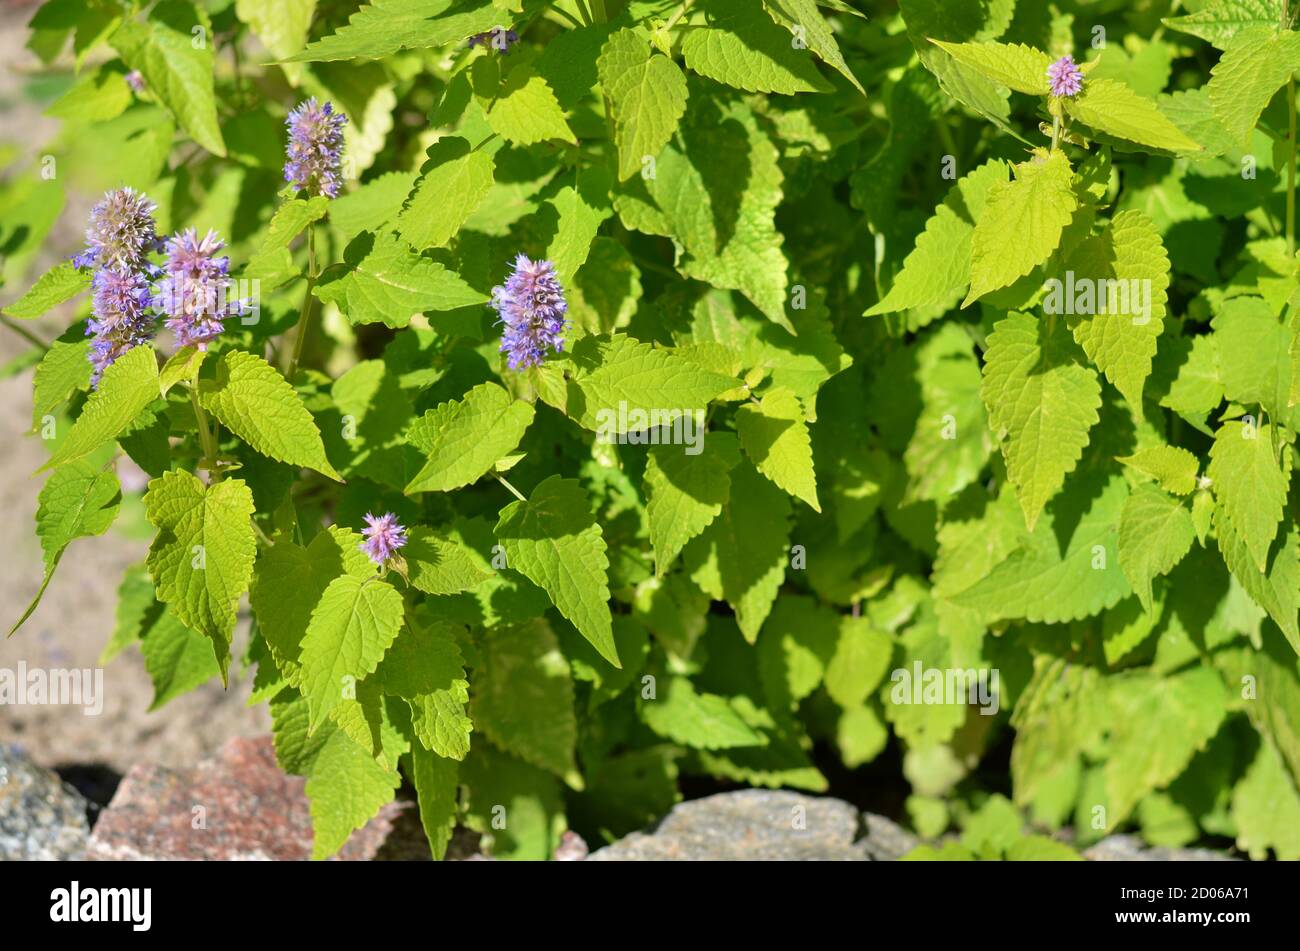 Agastache foeniculum or Anise hyssop - species of perennial aromatic plant in the mint family growing outdoors in the garden, medicinal herb. Stock Photo